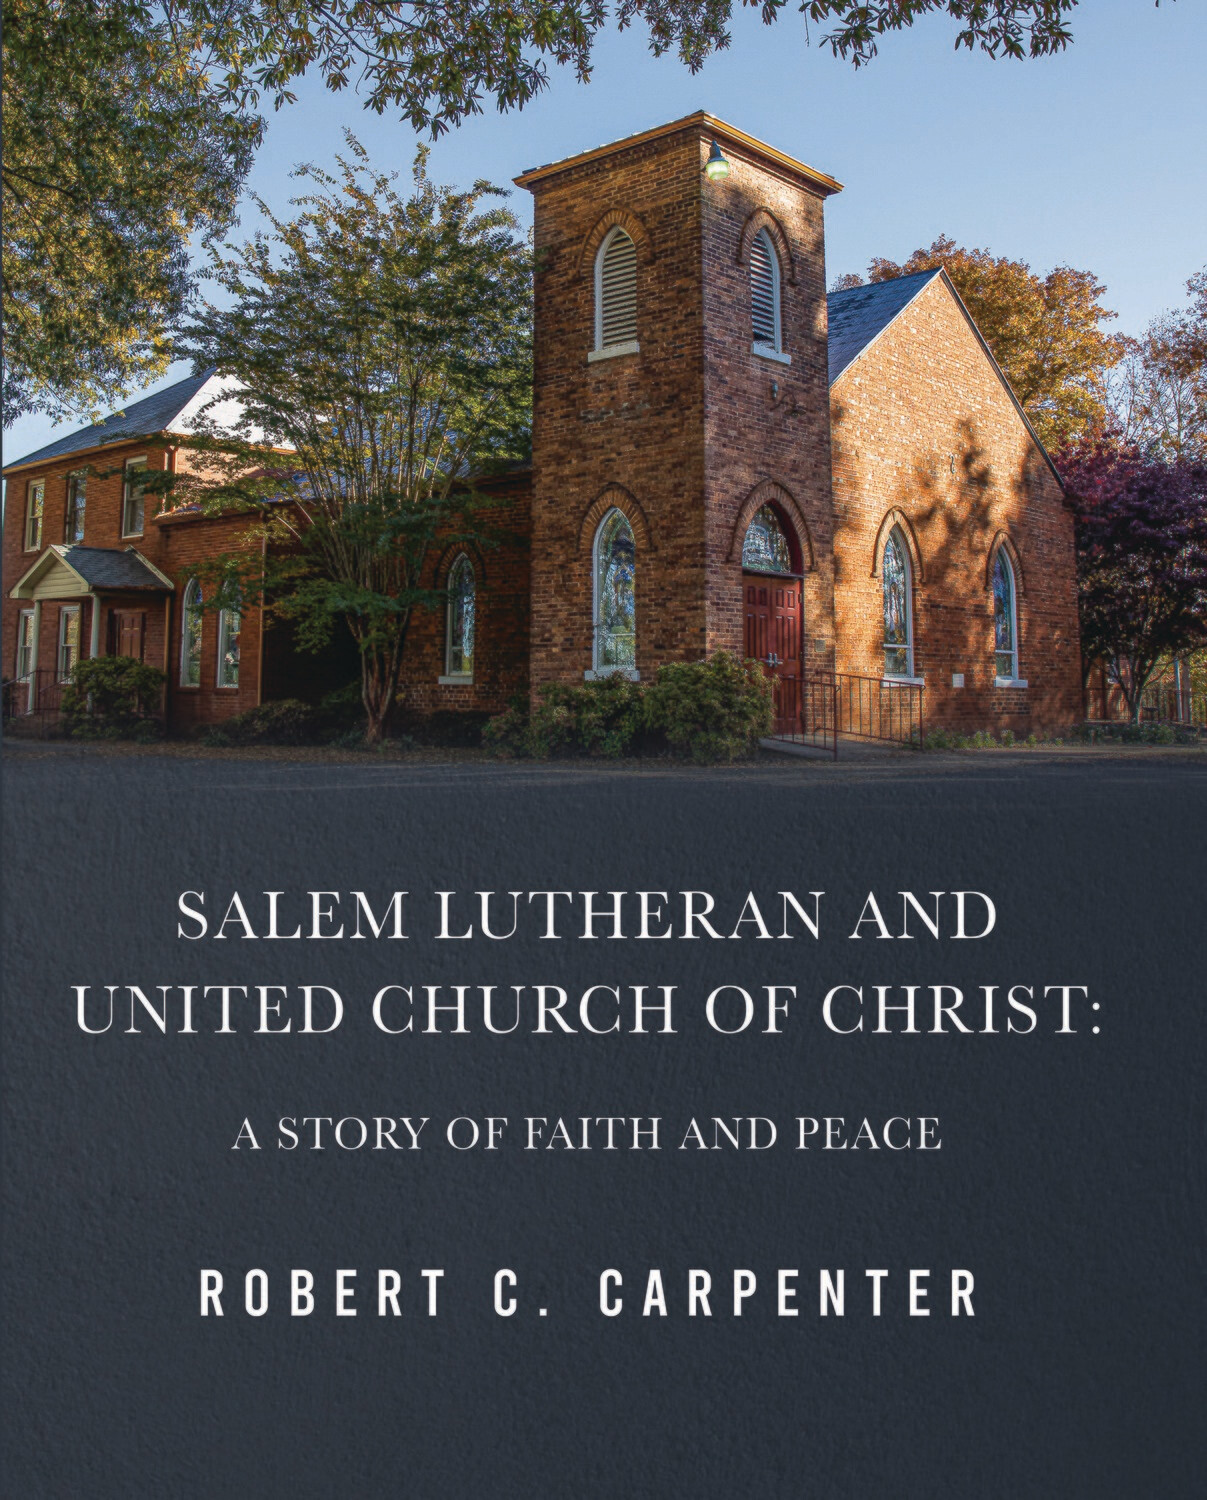 Salem Lutheran and United Church of Christ: A Story of Faith and Peace